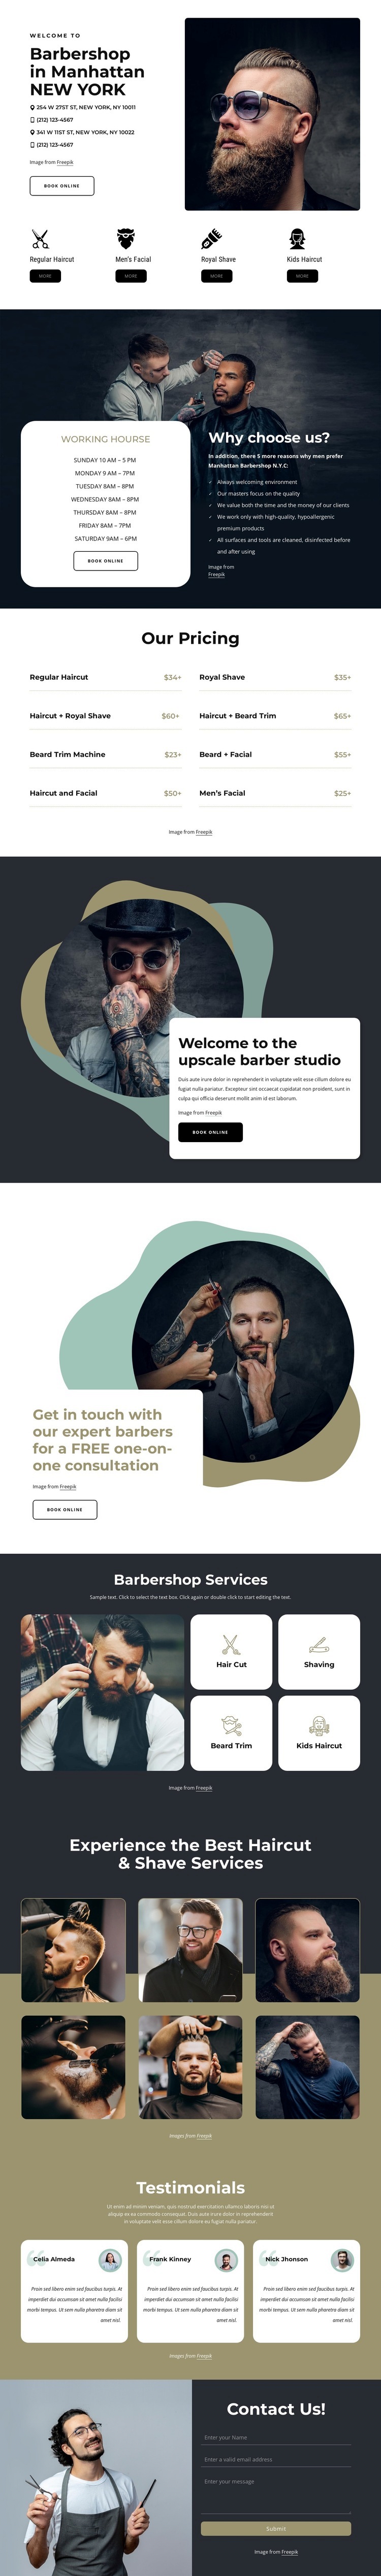 Hight quality grooming services Web Page Design